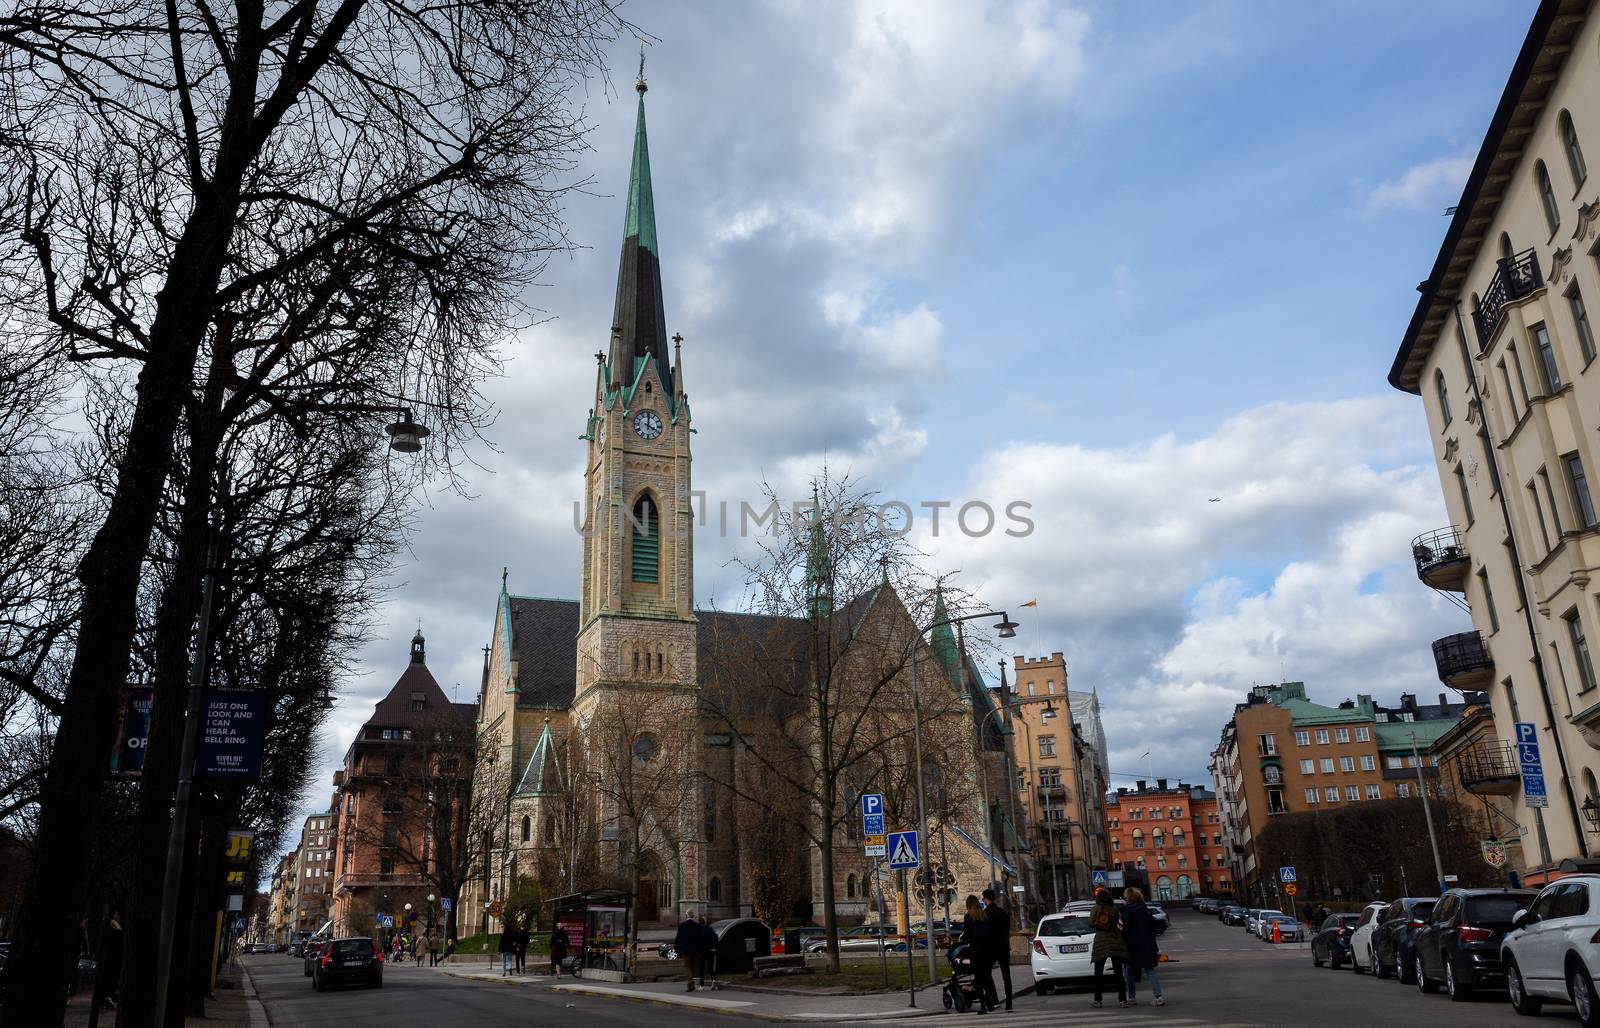 Sights of the Swedish capital by fifg